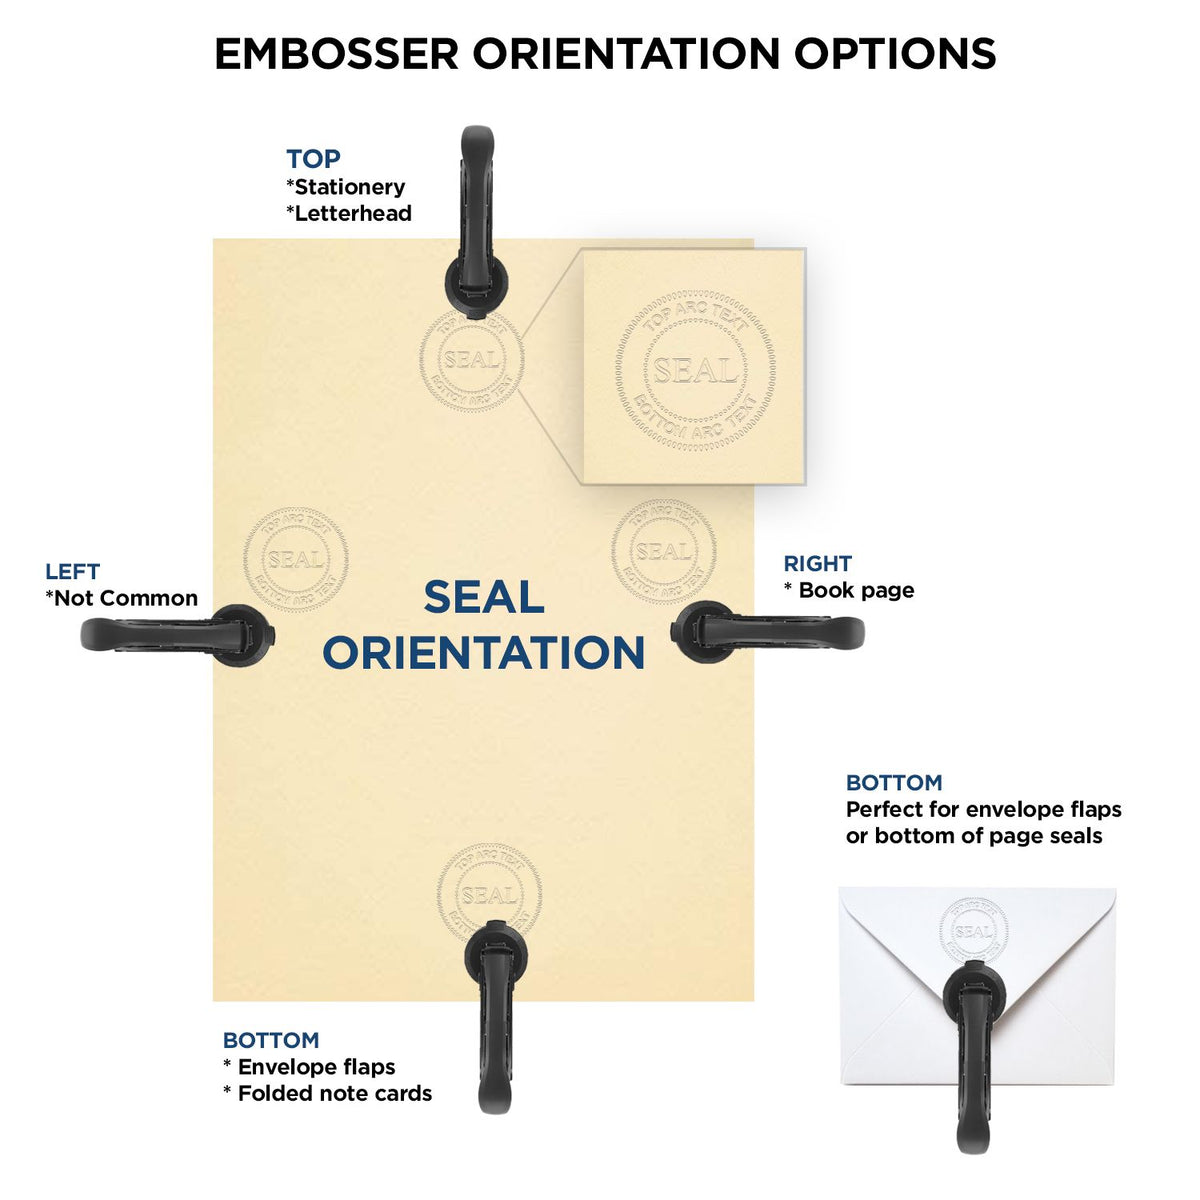 An infographic for the Heavy Duty Cast Iron Georgia Geologist Seal Embosser showing embosser orientation, this is showing examples of a top, bottom, right and left insert.